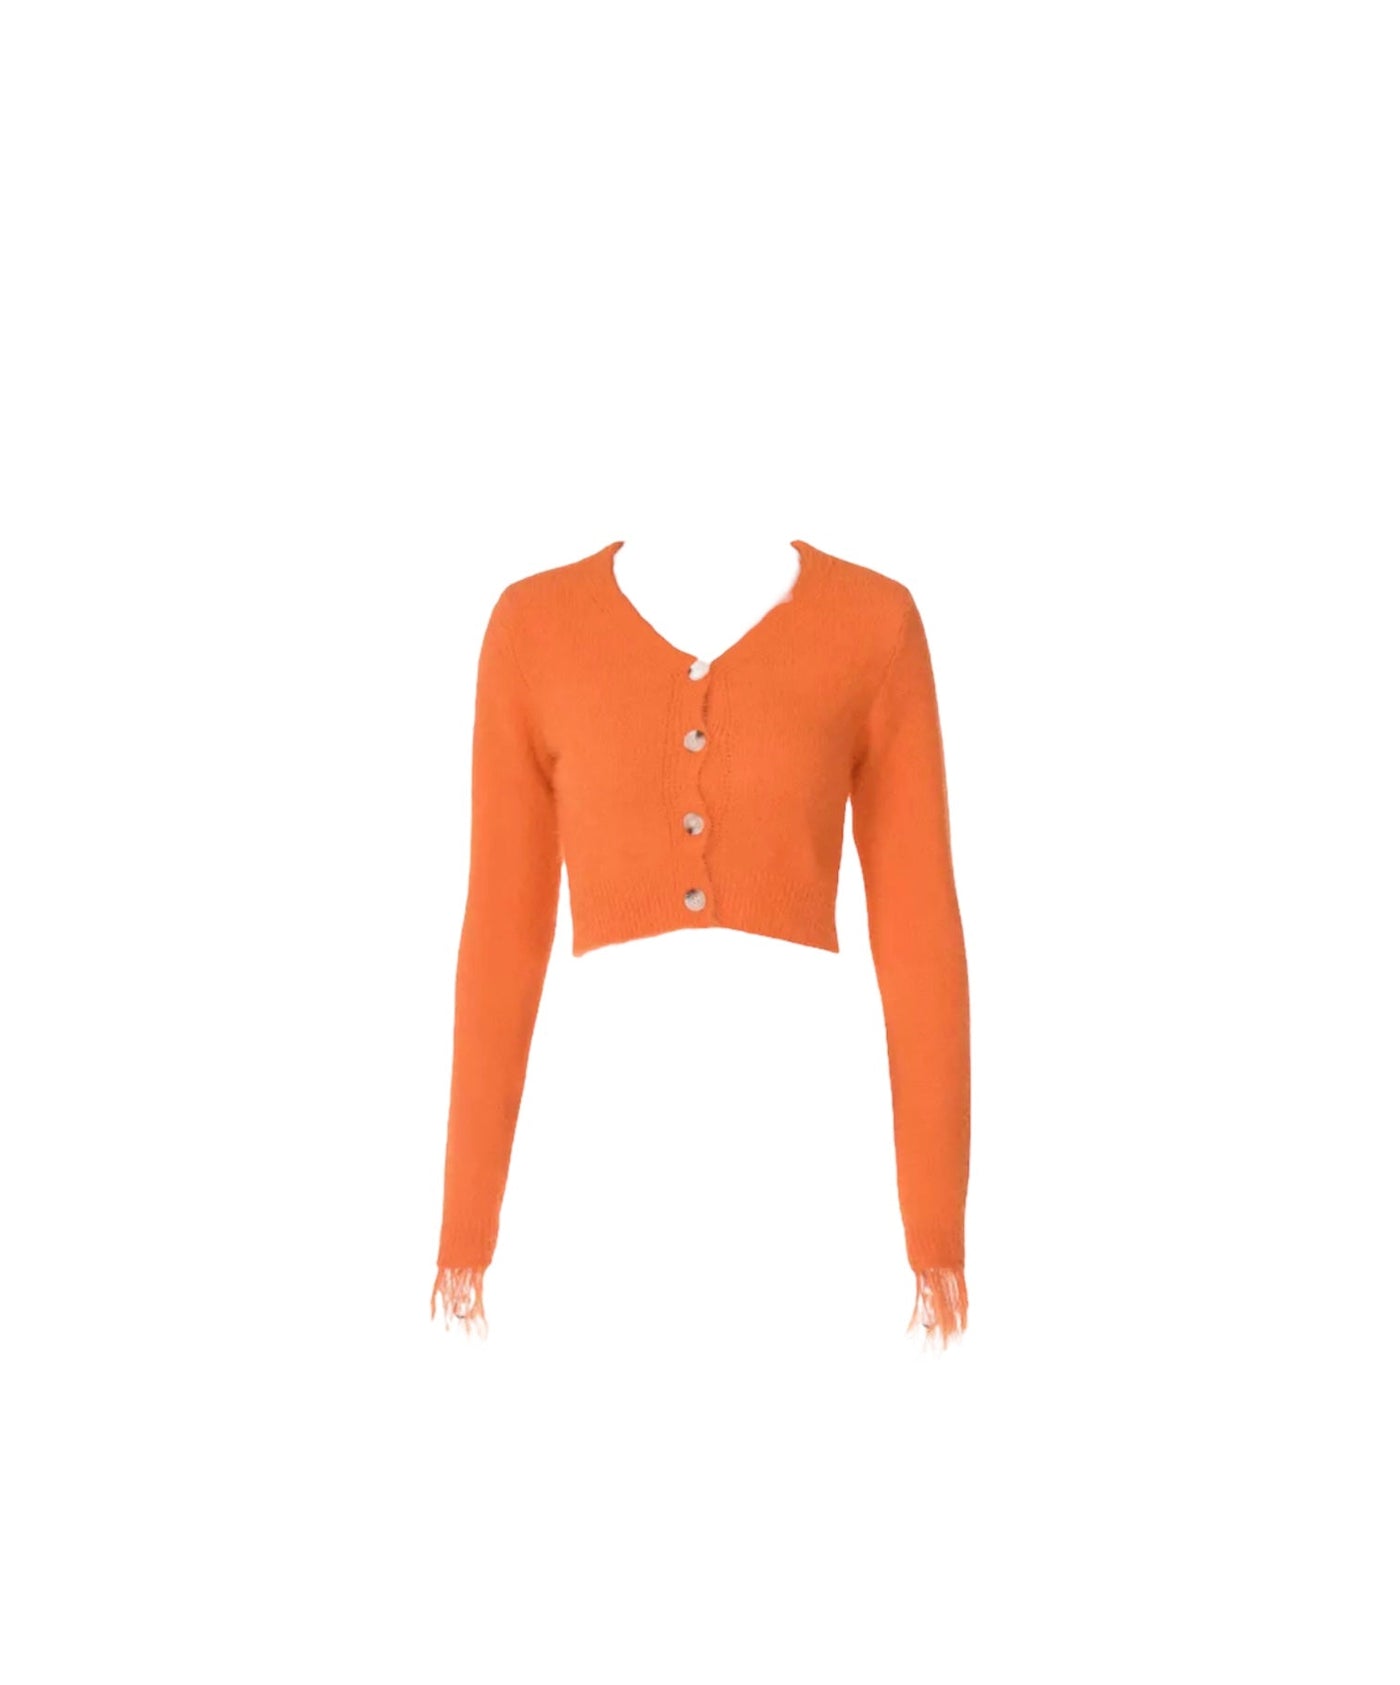 Be For Me Orange Sweater Top - Dezired Beauty Boutique